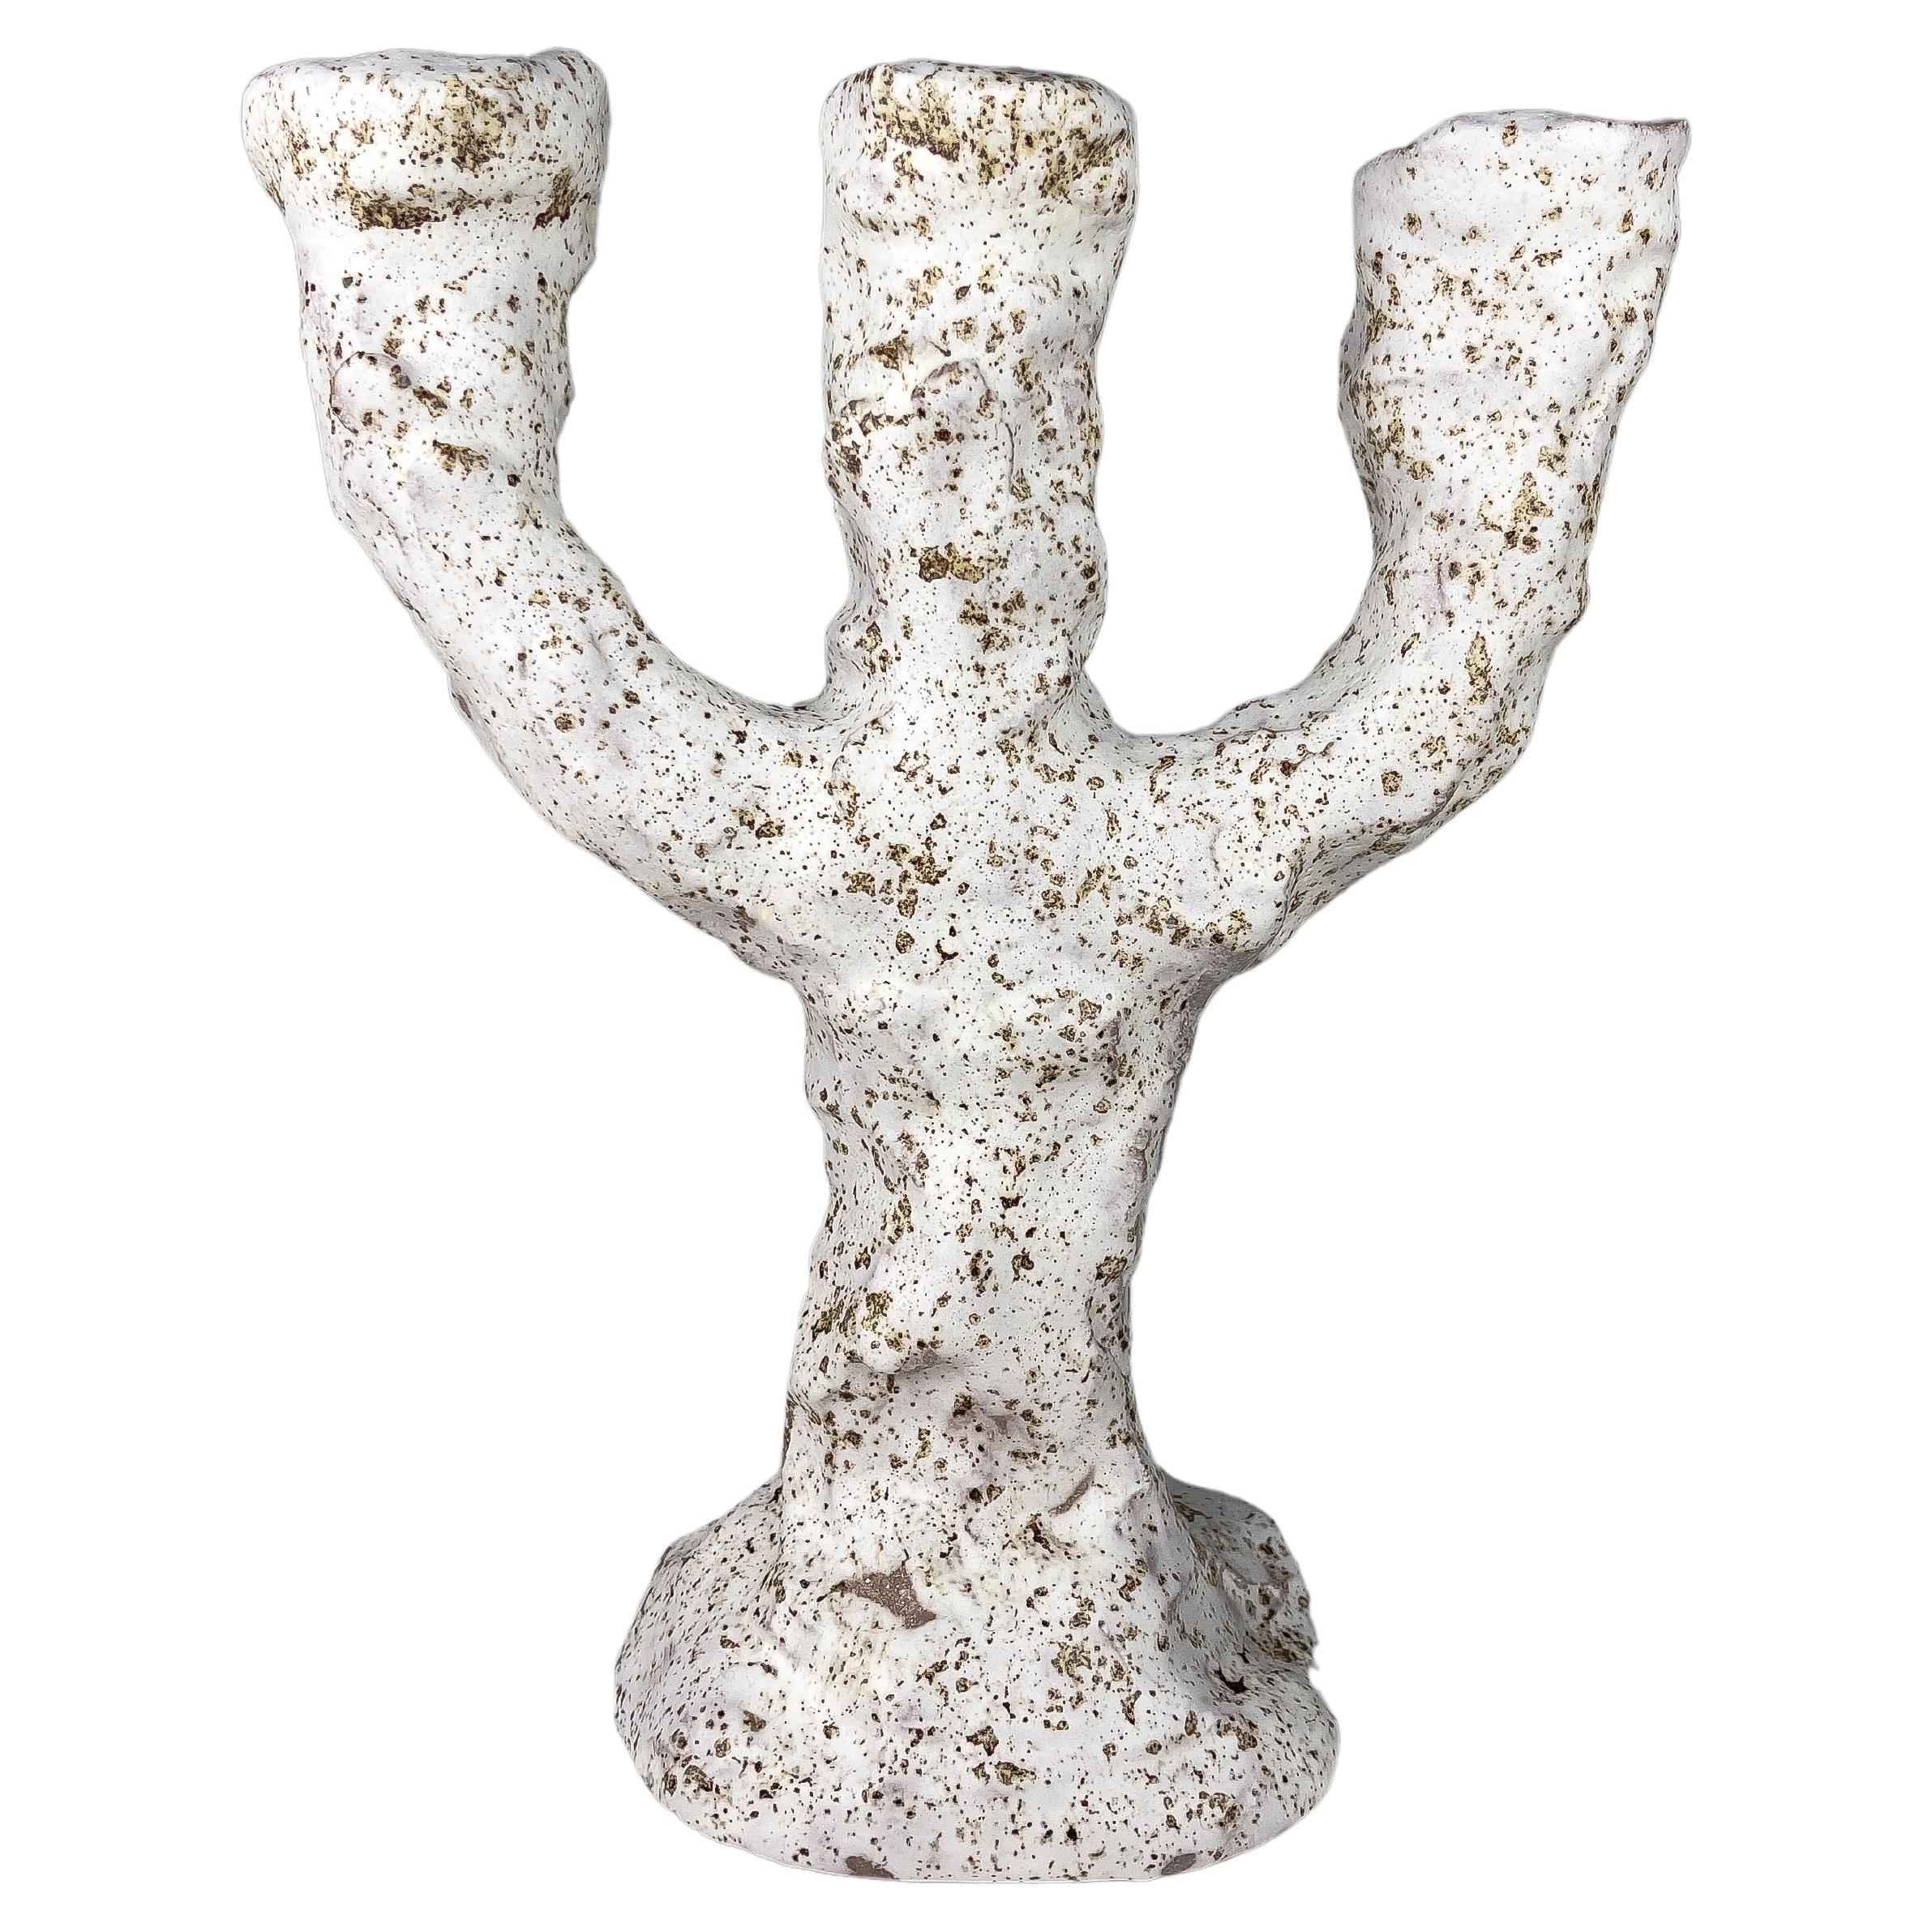 Minute Ceramic Candle-Holder For Sale